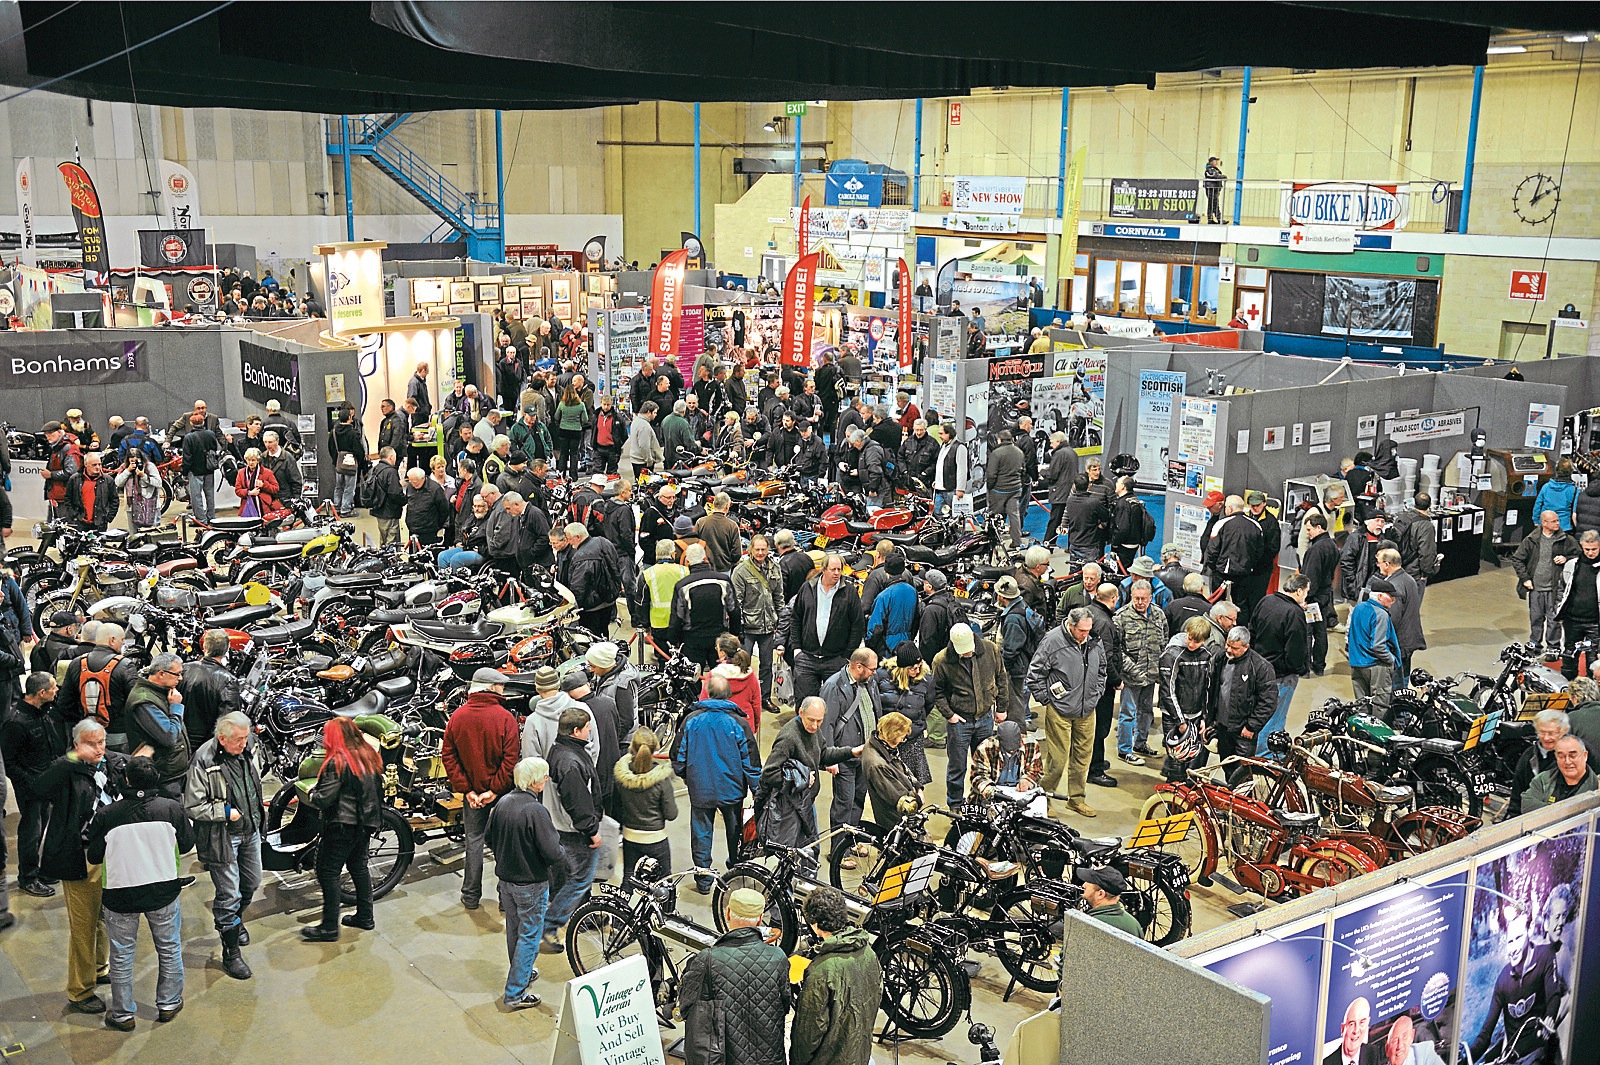 The Bristol Classic Bike Show is revving up the excitement for motorcycle enthusiasts